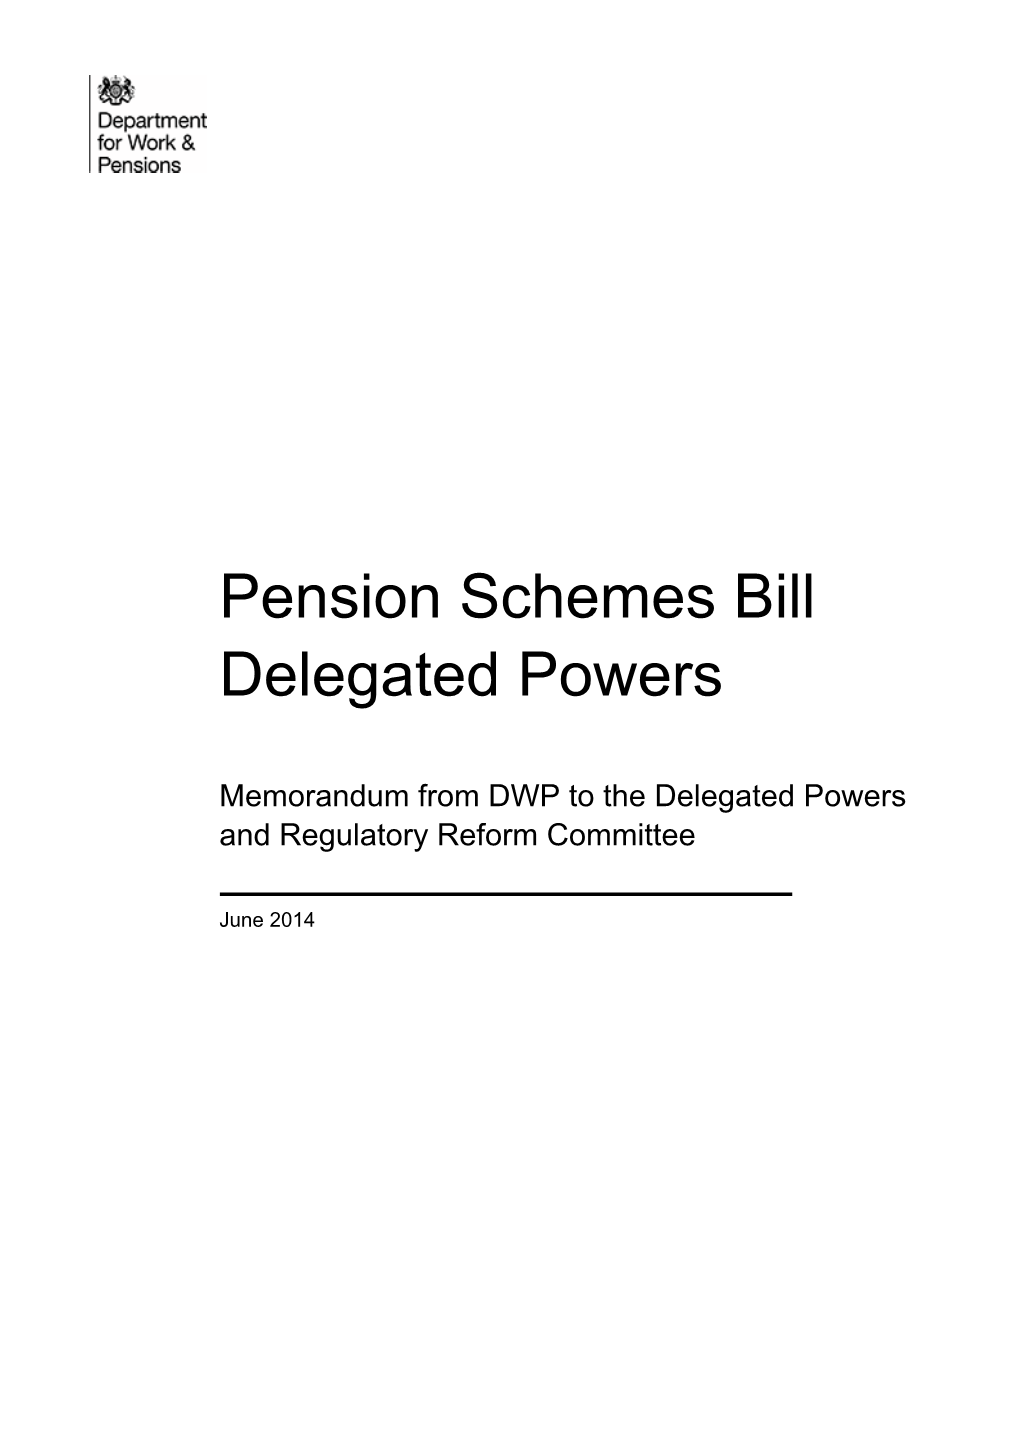 Pension Schemes Bill Delegated Powers